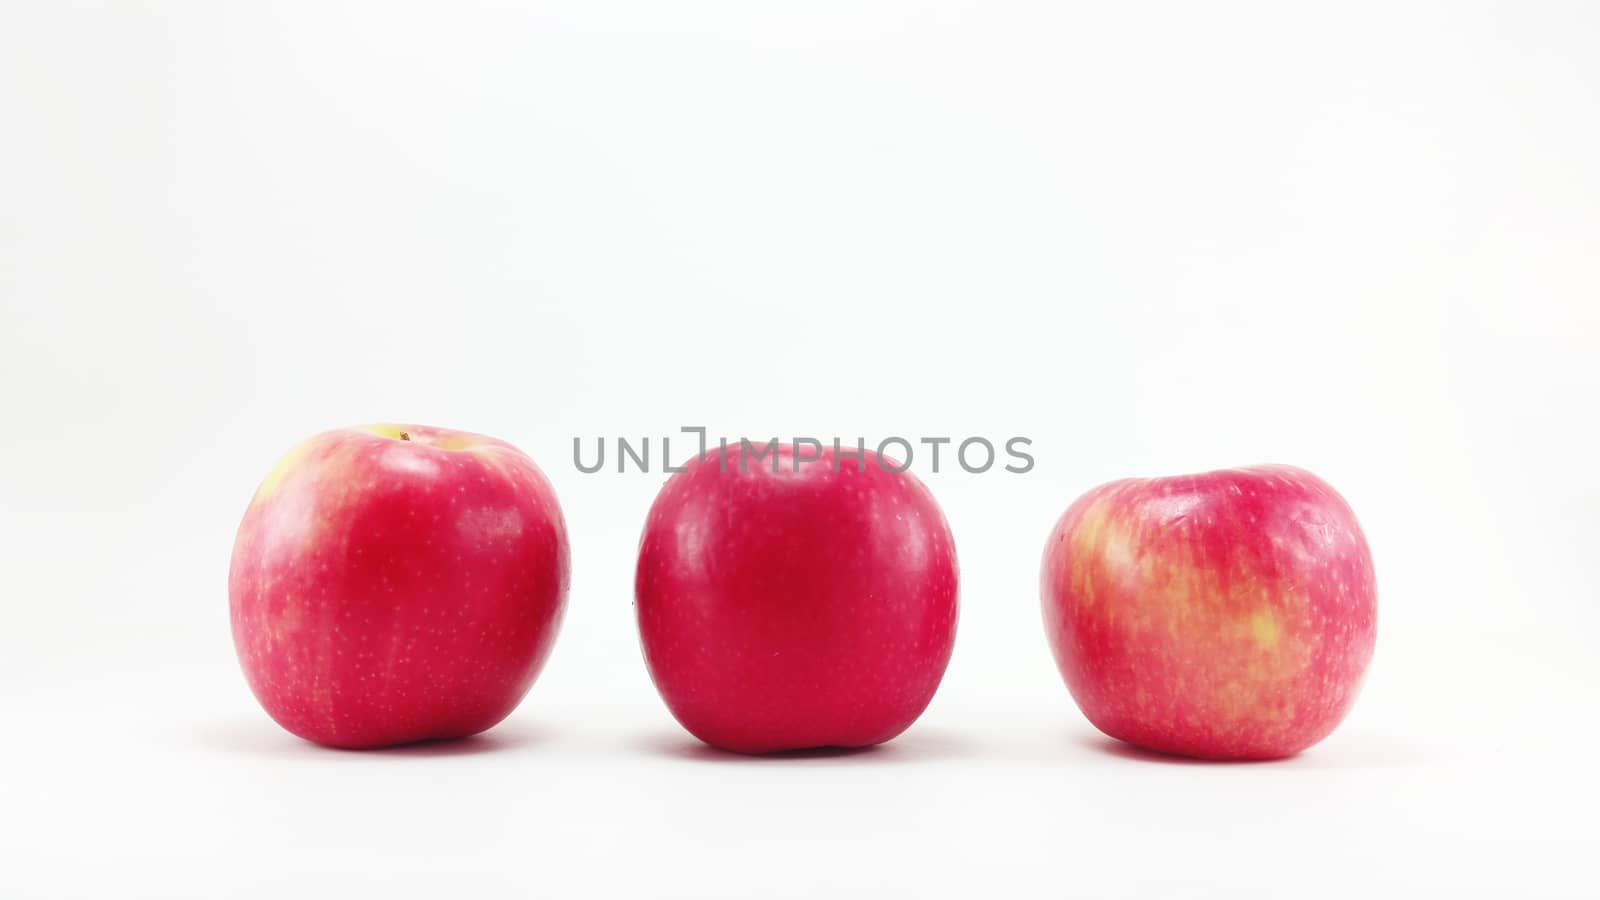 3 red apples in the row in white background